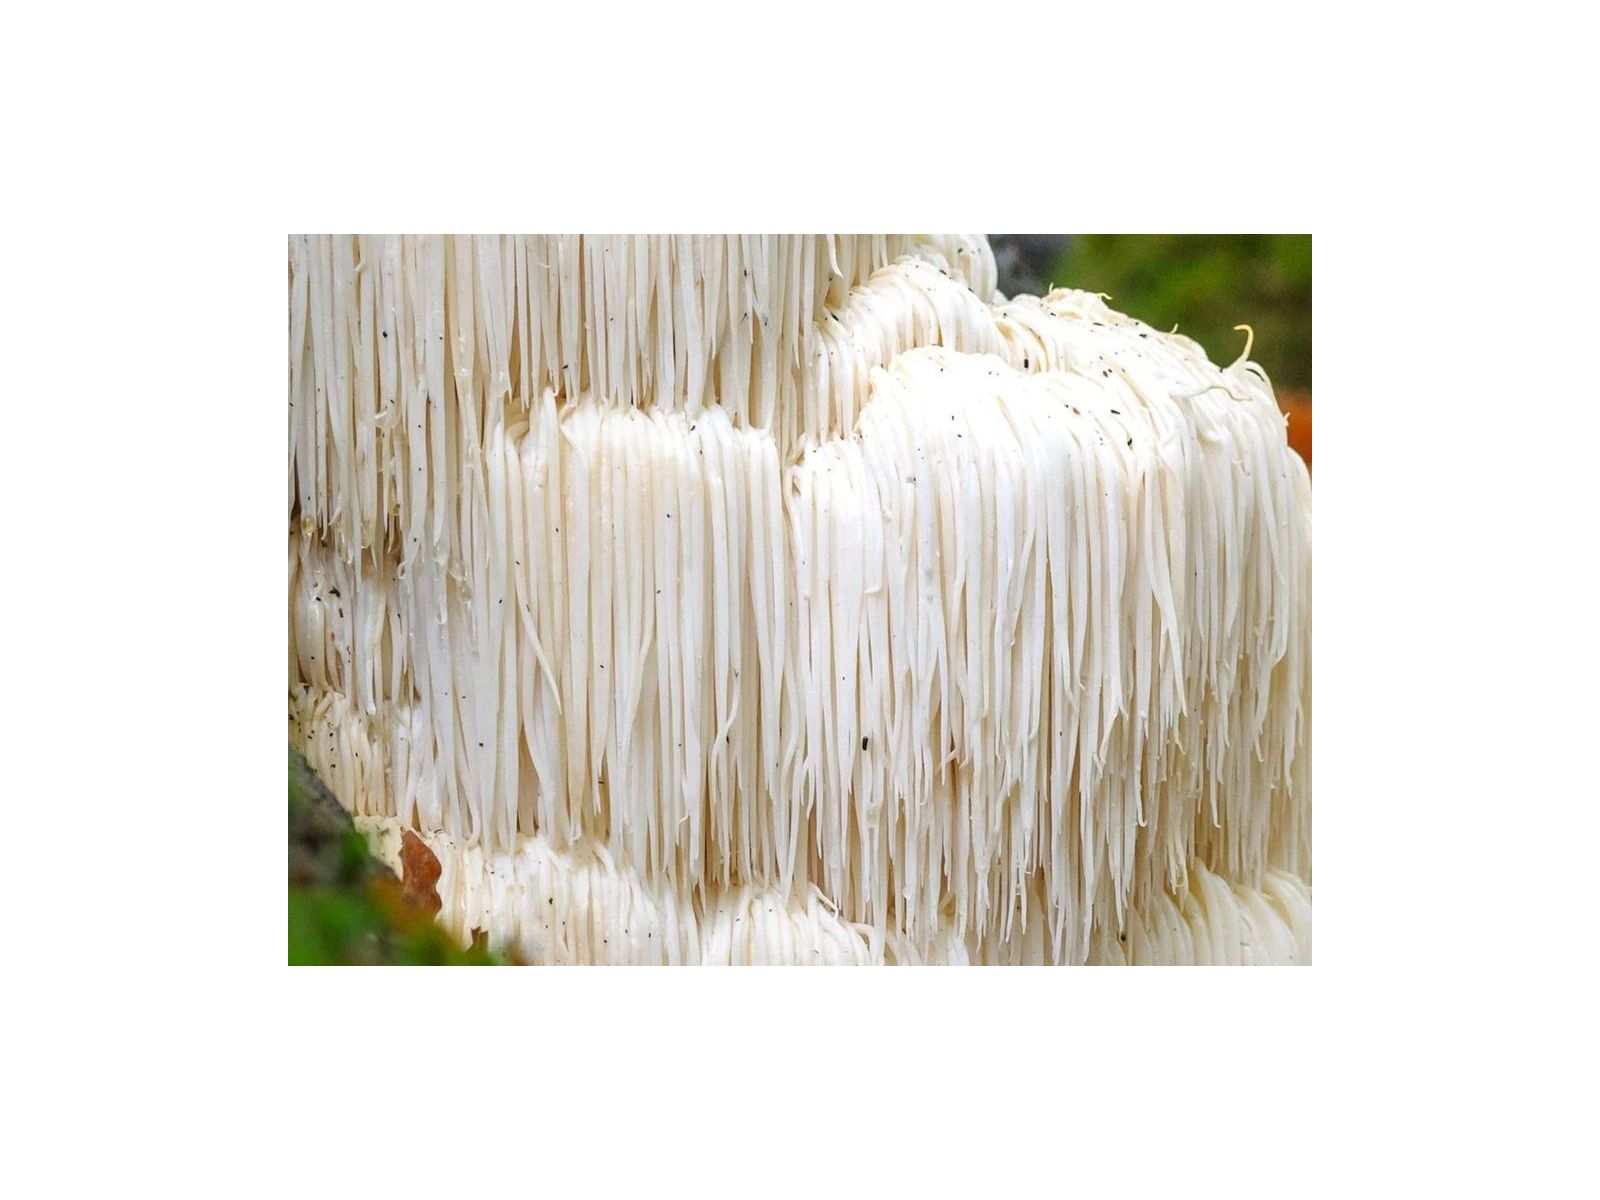 LION'S MANE - ROARING WITH BENEFITS